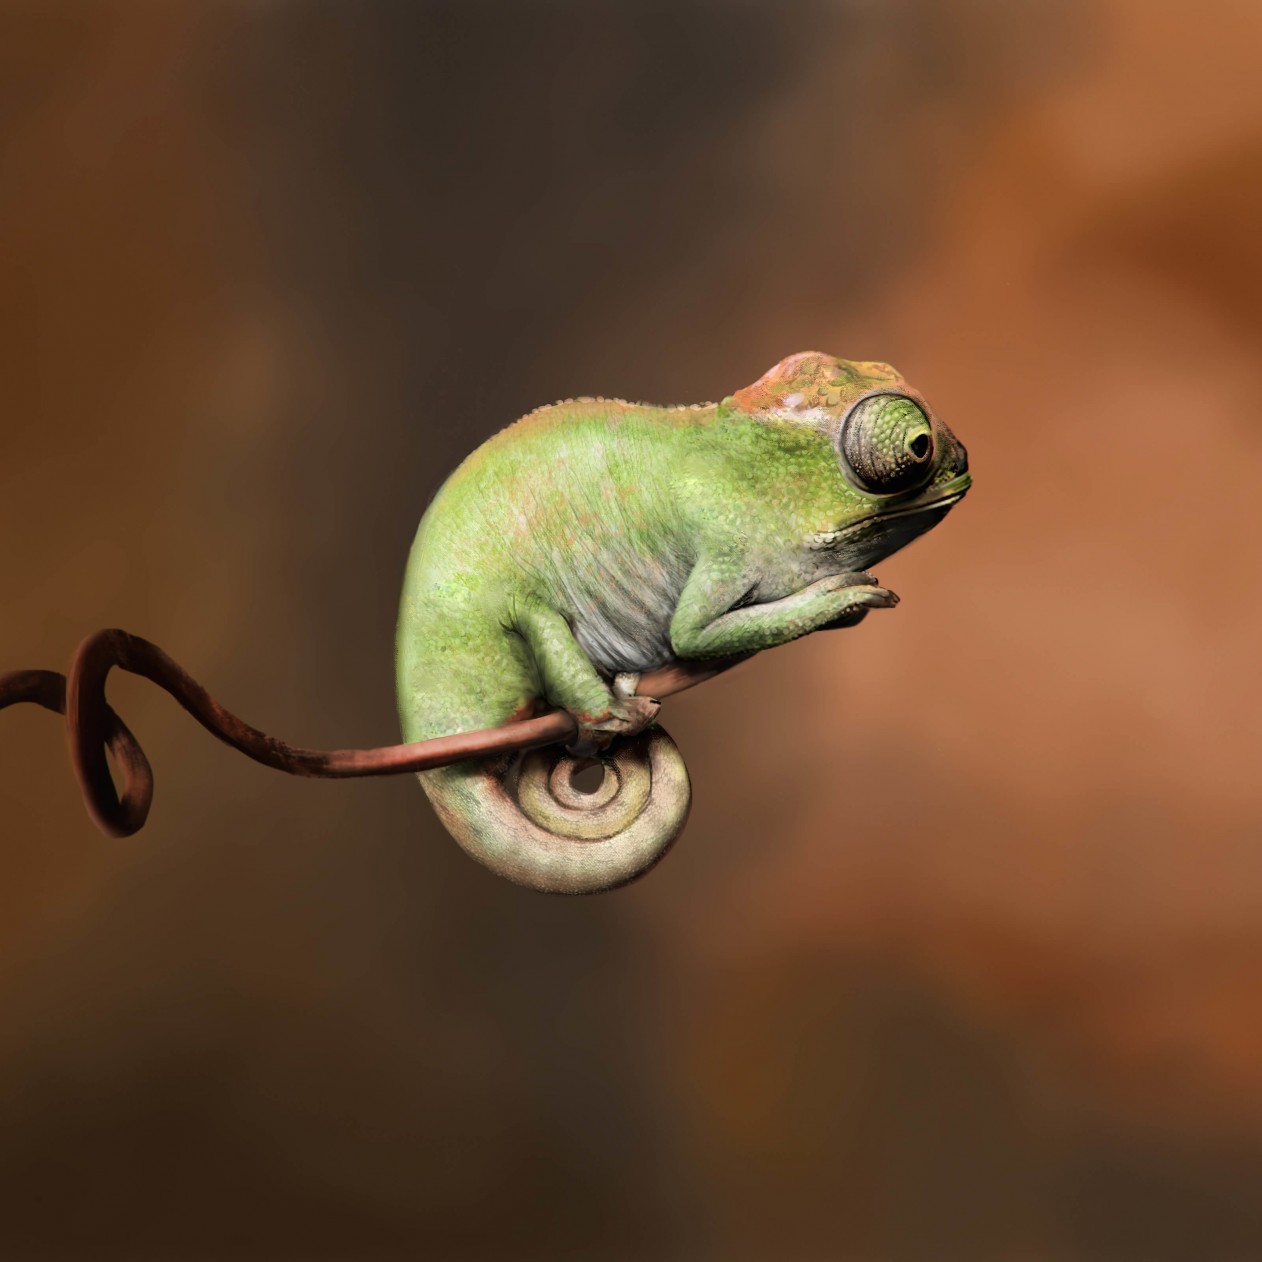 Baby Chameleon Perching On a Twisted Branch Wallpaper for Apple iPad mini